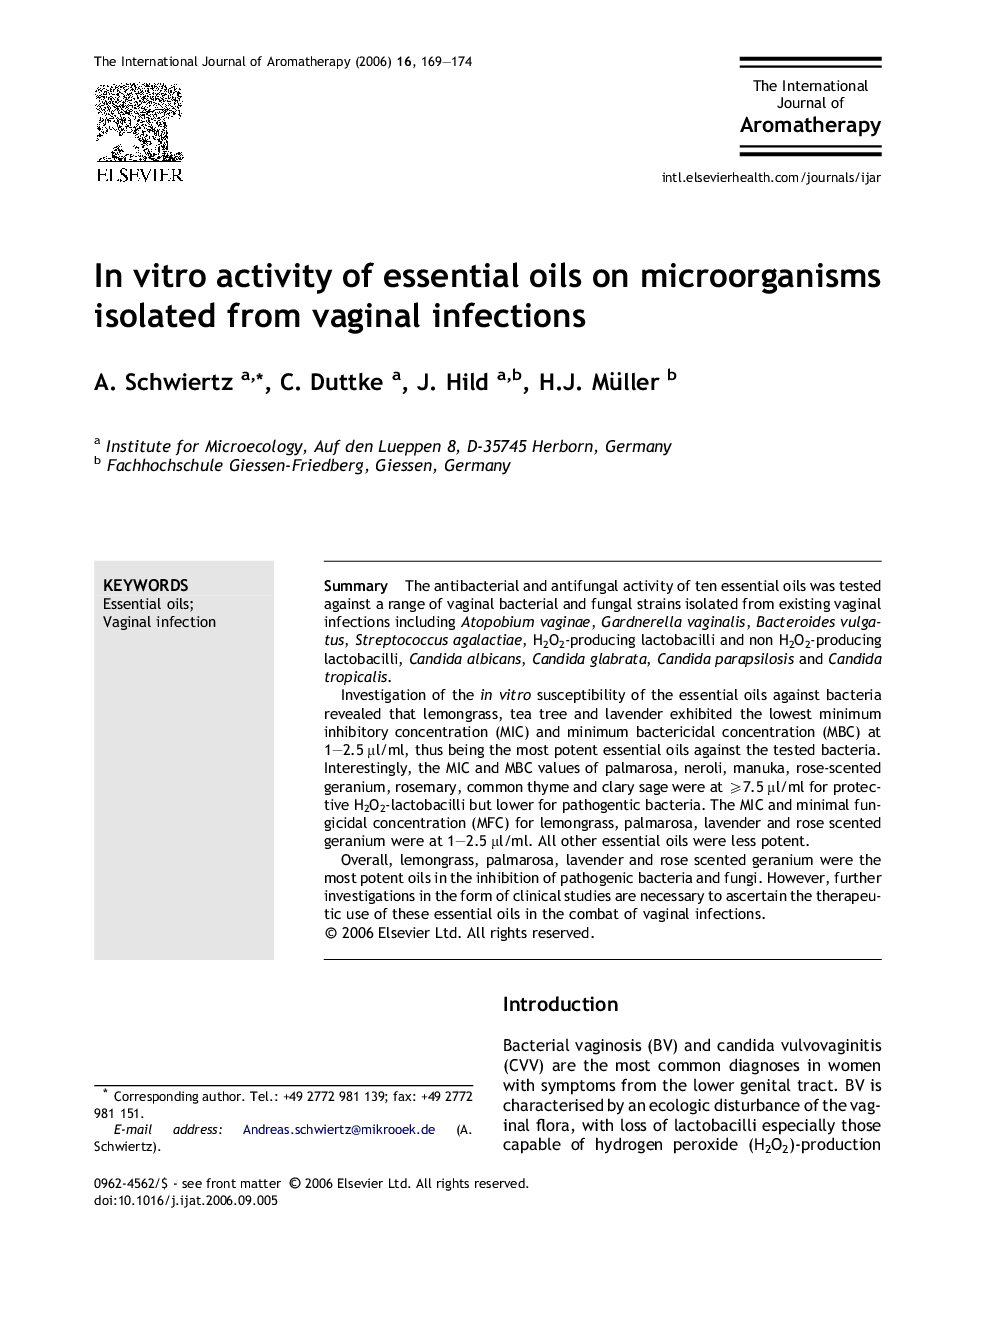 In vitro activity of essential oils on microorganisms isolated from vaginal infections